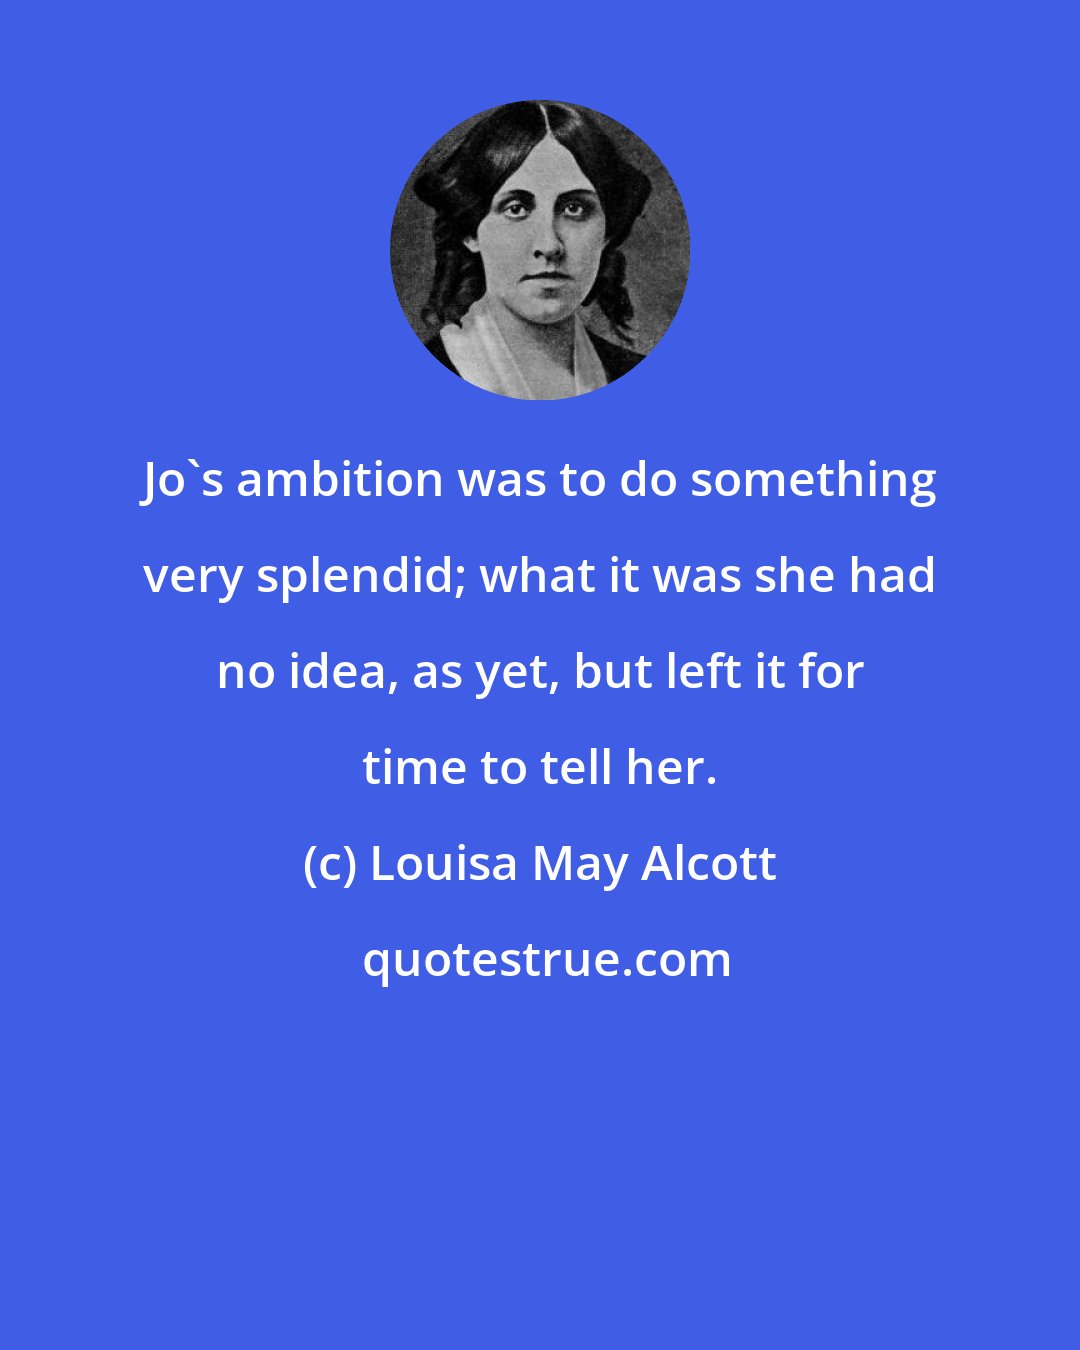 Louisa May Alcott: Jo's ambition was to do something very splendid; what it was she had no idea, as yet, but left it for time to tell her.